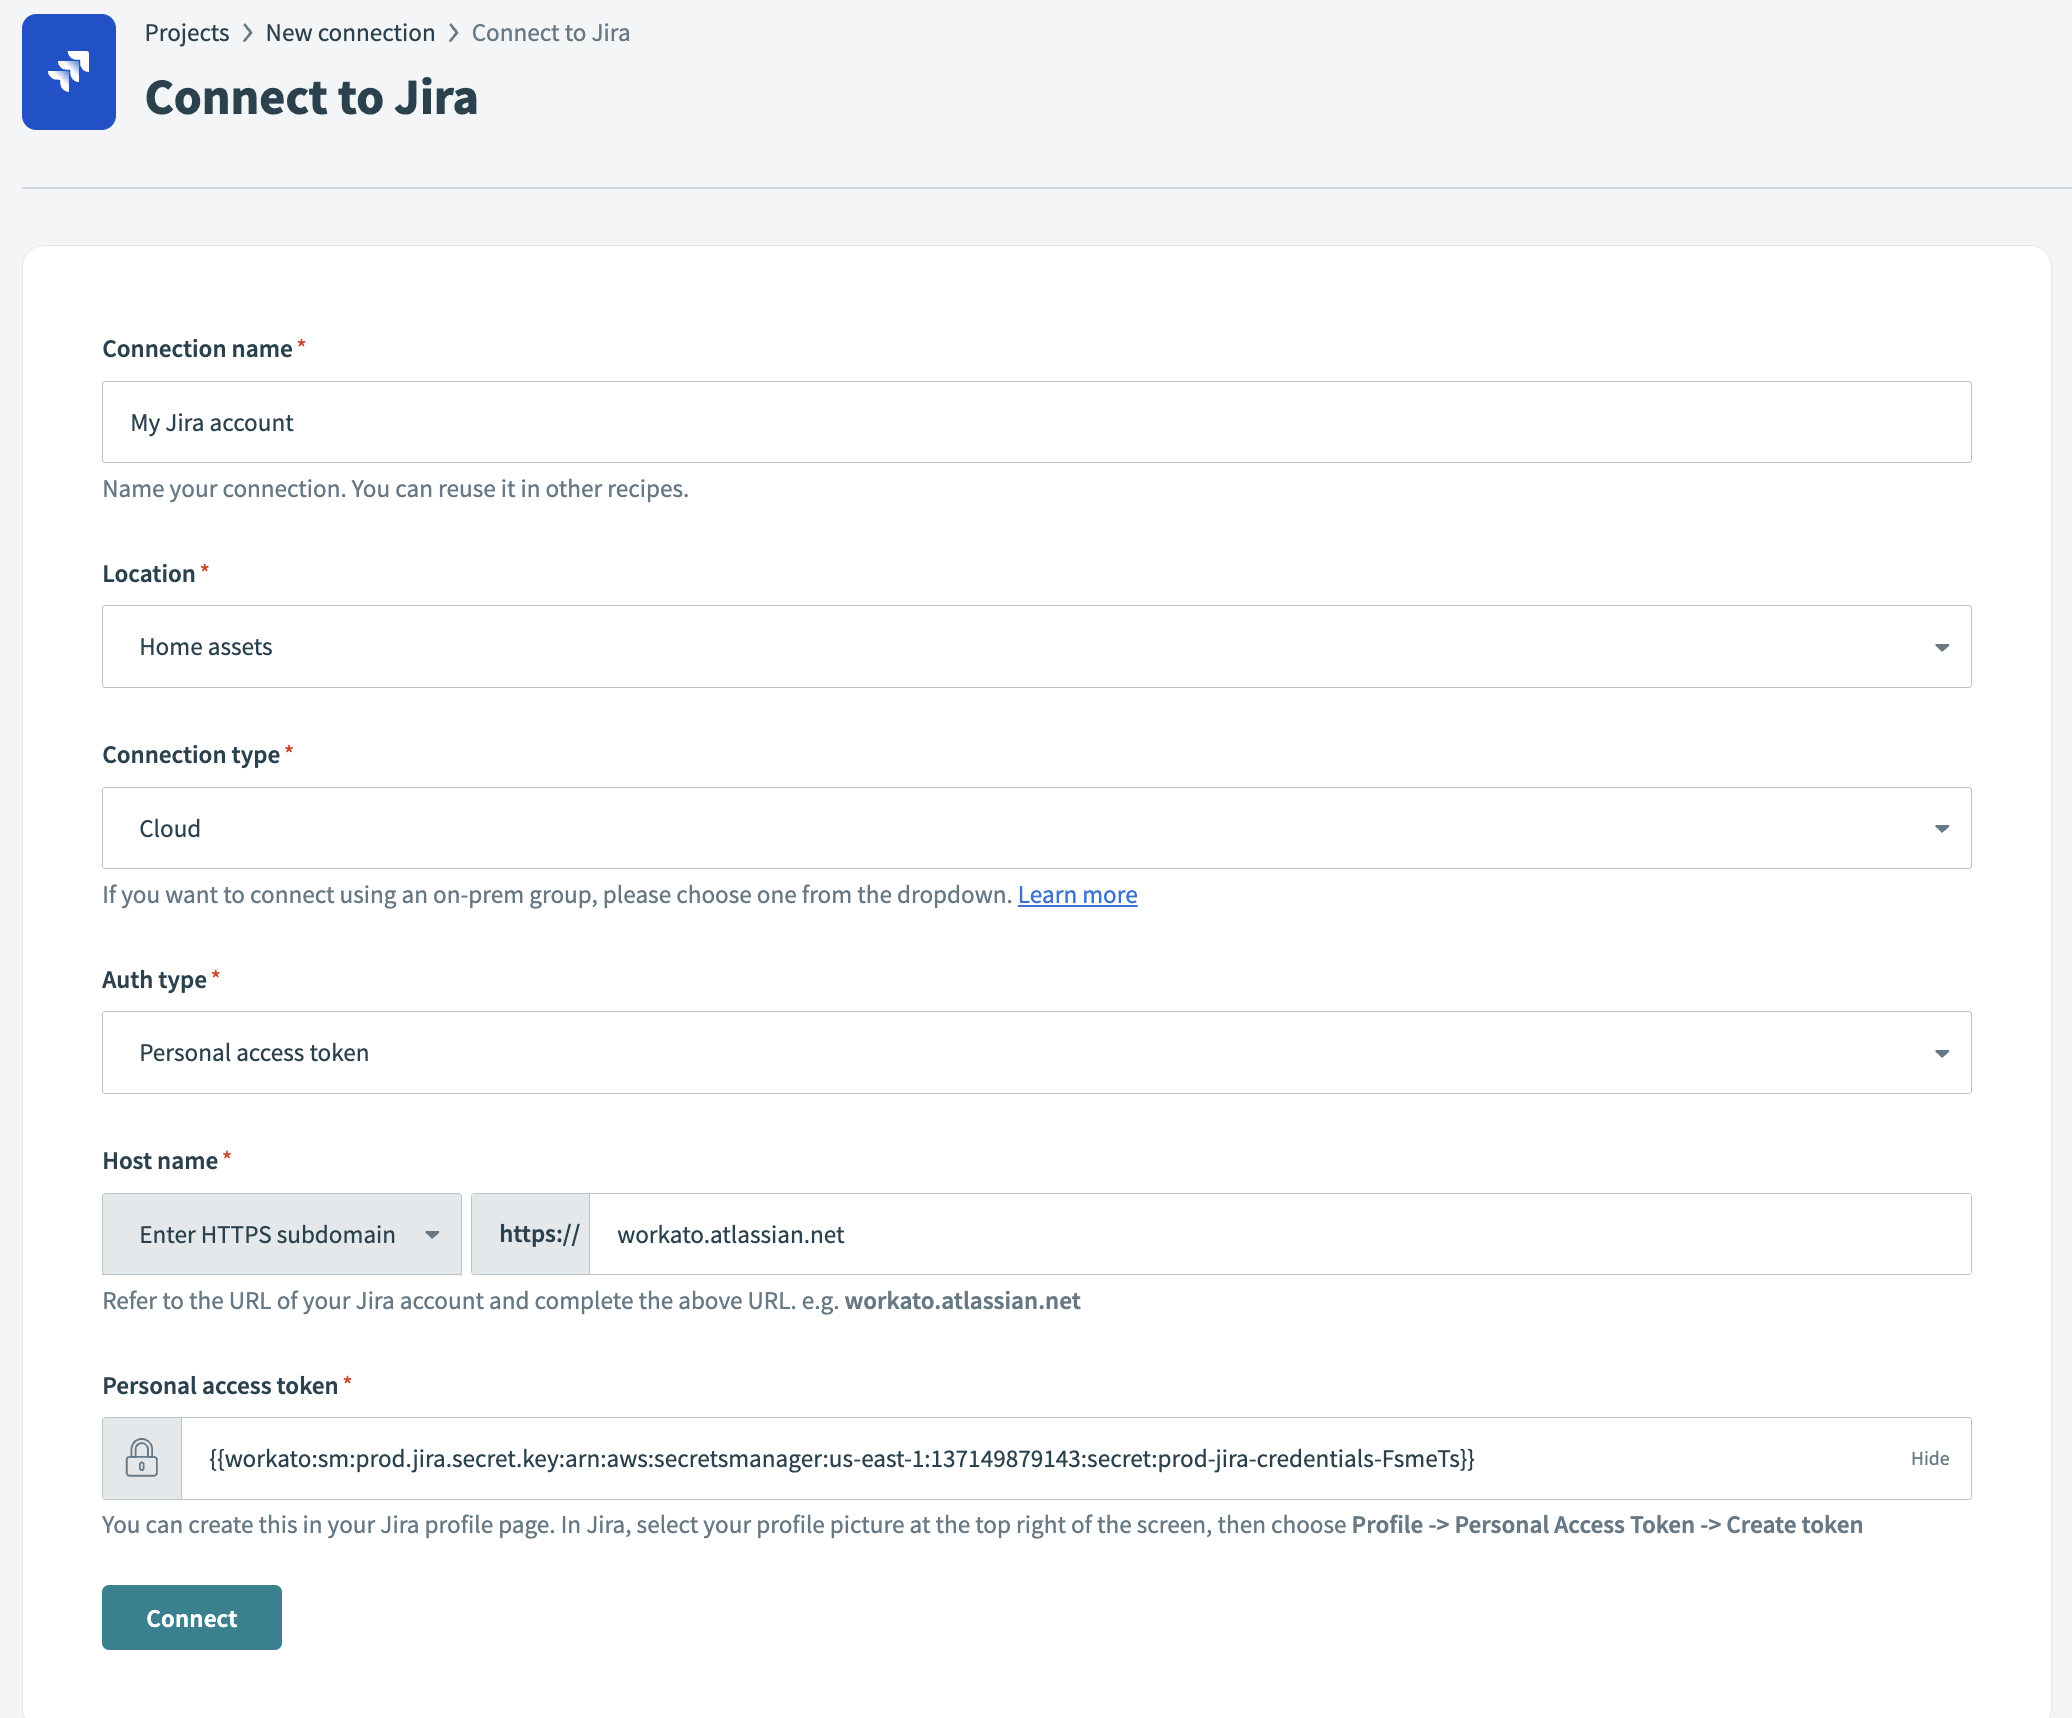 JIRA connection in Workato configured with an AWS secret